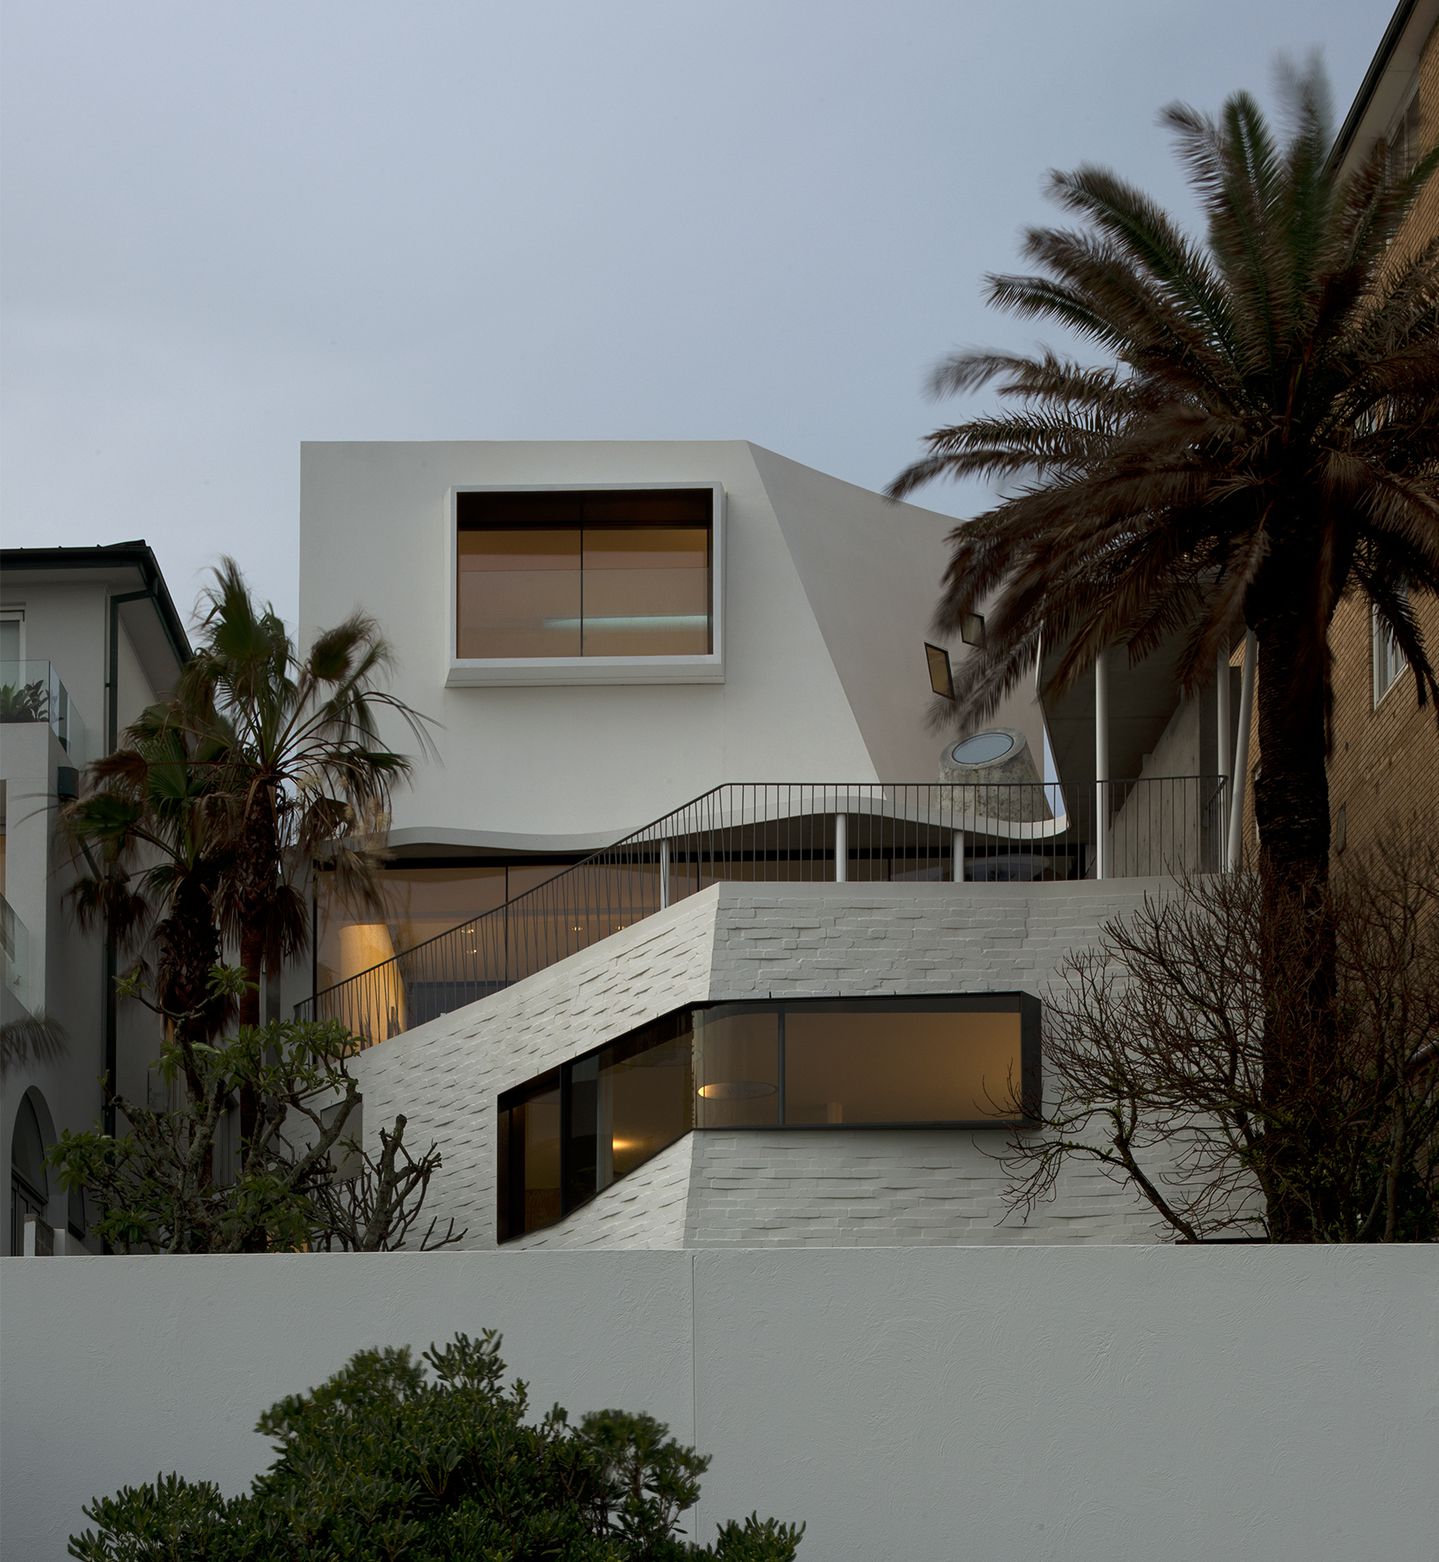 Sculptural concrete beachfront house located in Tamarama along the Bondi to Coogee walk designed by Durbach Block Jaggers Architects.